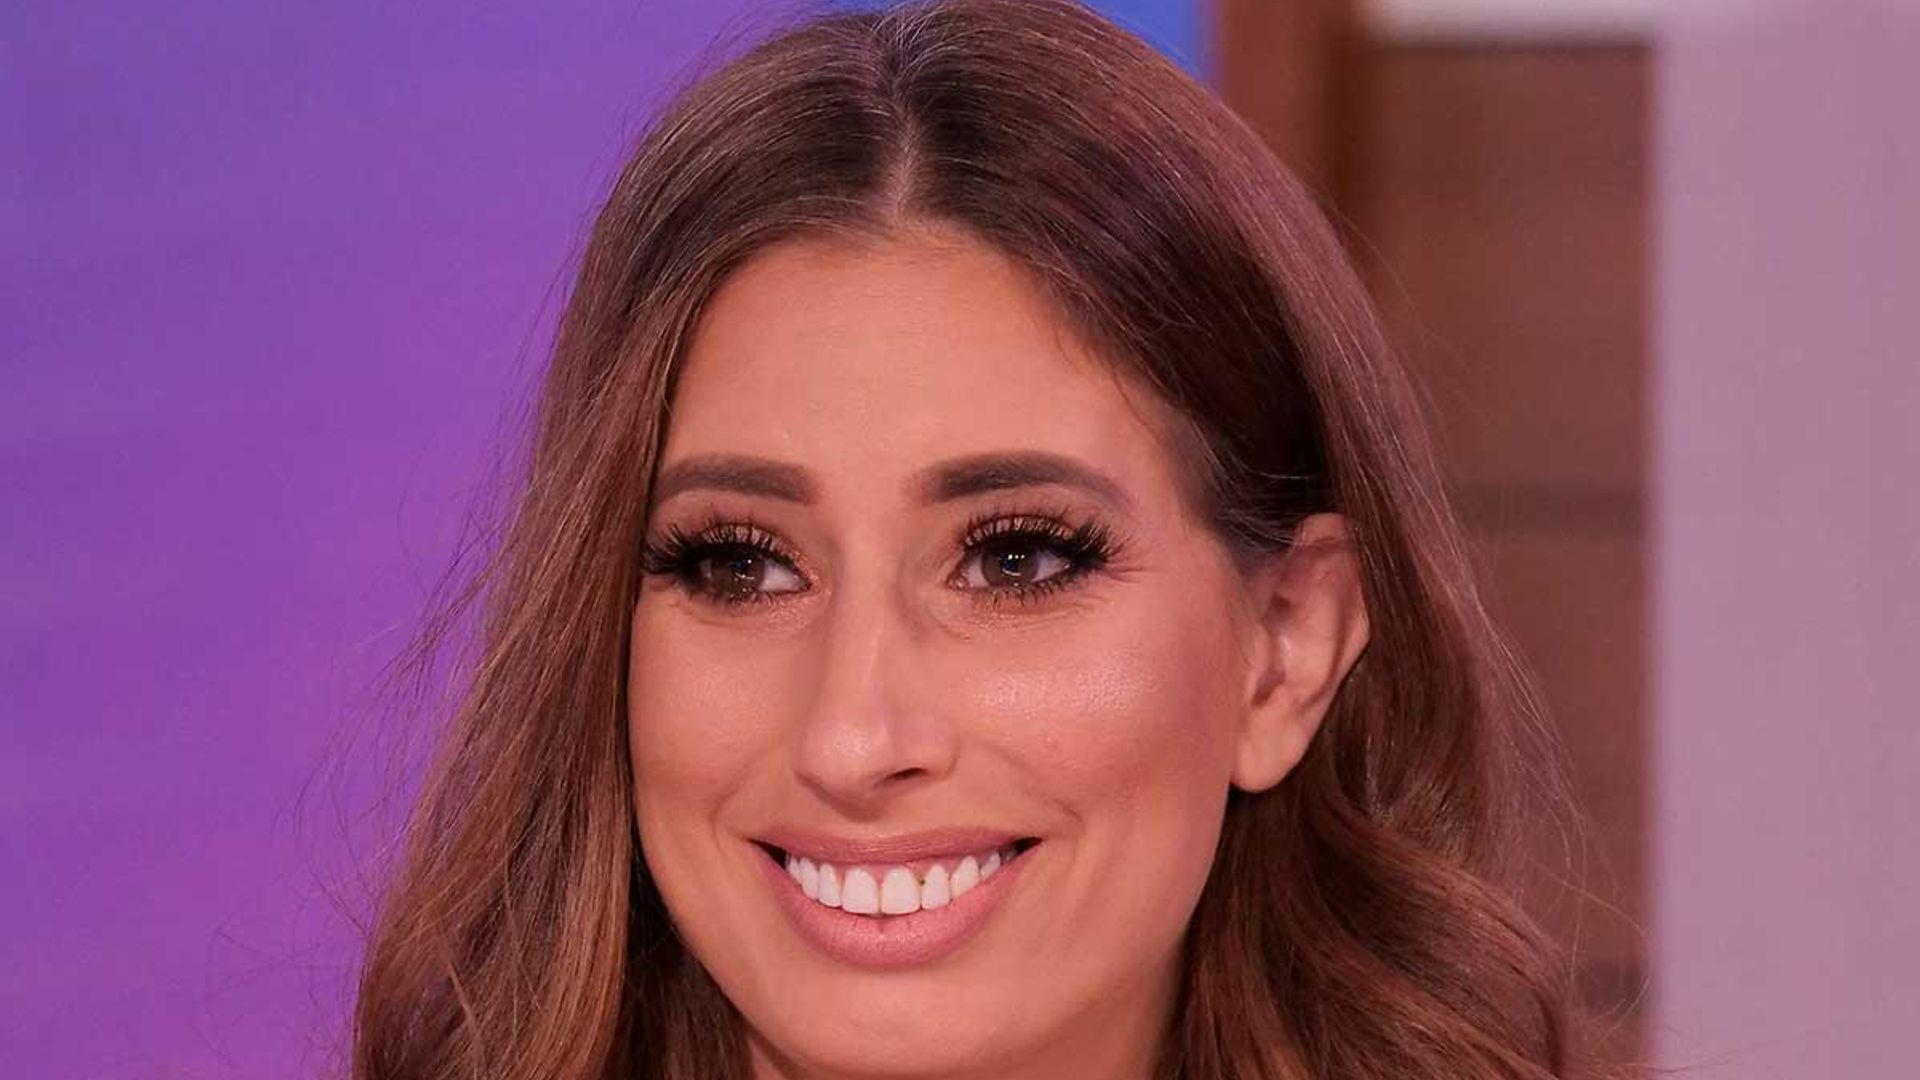 stacey solomon smiling